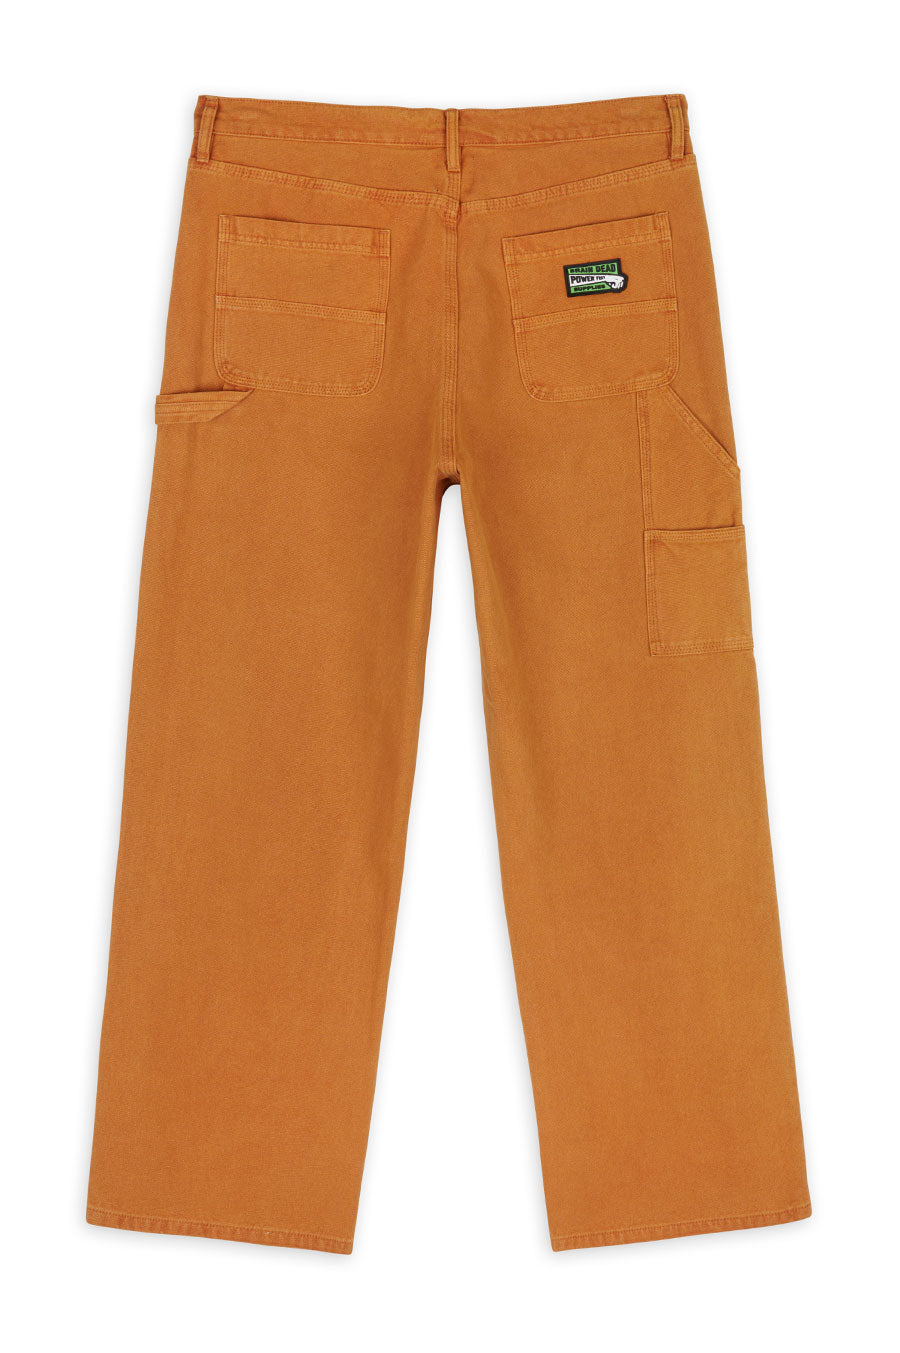 BRAIN DEAD CANVAS GARDENING PANT WASHED DUCK BROWN